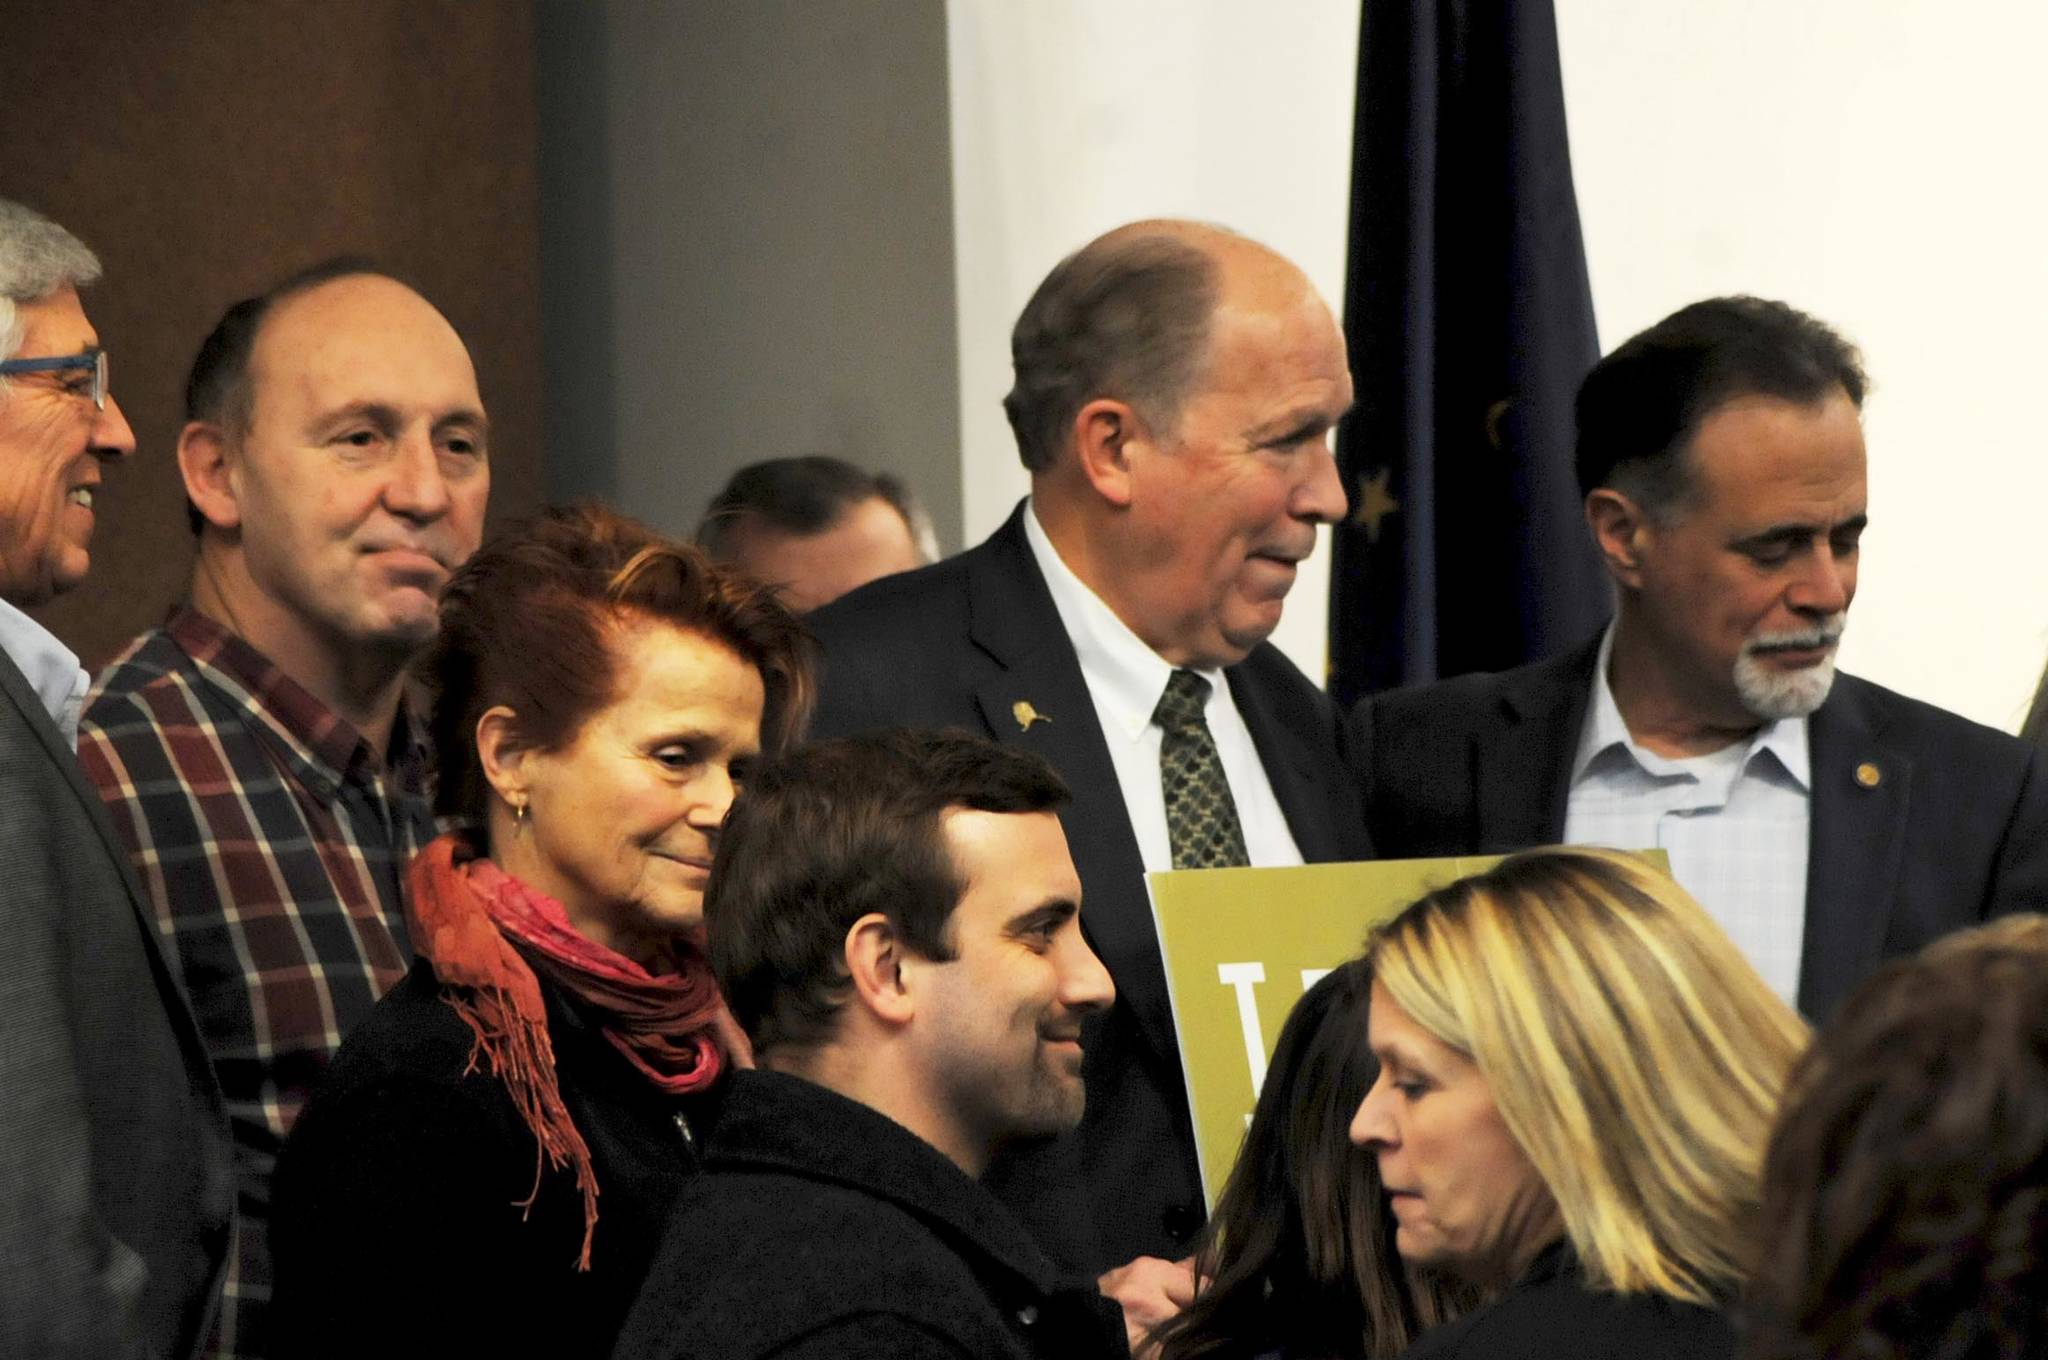 Gov. Bill Walker (center), Sen. Peter Micciche, R-Soldotna, (right) and Rep. Gary Knopp, R-Kenai, (left) stand among a group of citizens and government officials after the conclusion of a joint luncheon of the Kenai and Soldotna chambers of commerce Tuesday, Dec. 19, 2017 in Kenai, Alaska. Walker visited Kenai to address the chambers of commerce with updates on the Alaska LNG Project. (Photo by Elizabeth Earl/Peninsula Clarion)